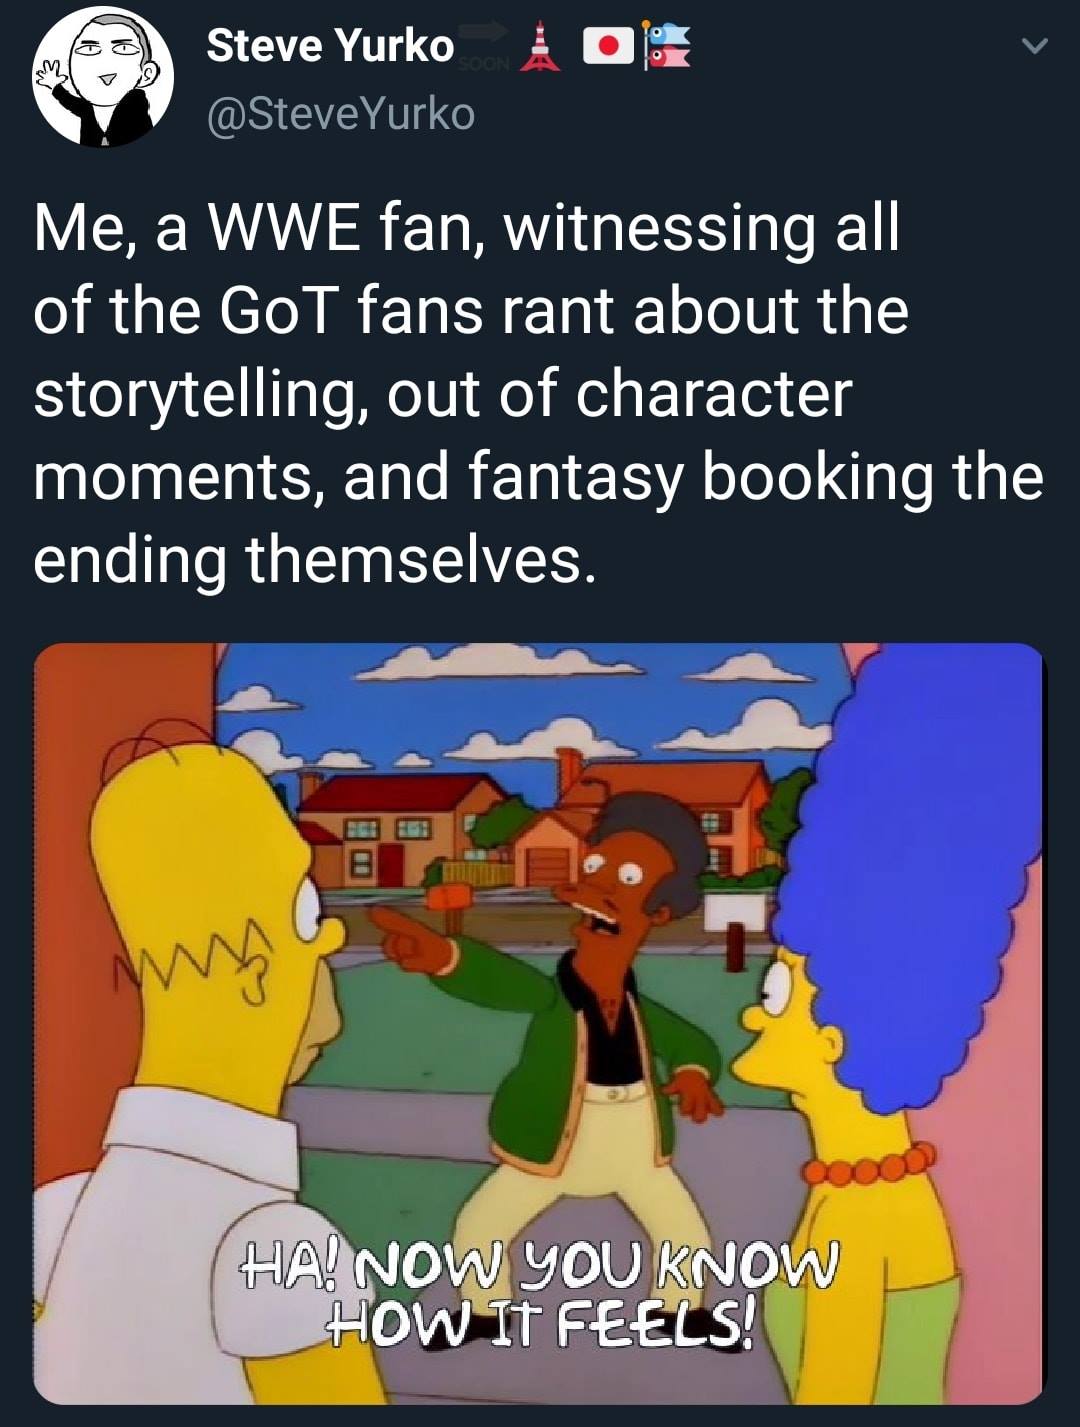 WWE wrestling memes - steve yurko wrestlinh - Ew Steve Yurko Me, a Wwe fan, witnessing all of the GoT fans rant about the storytelling, out of character moments, and fantasy booking the ending themselves. www. Soon 8 Ha! Now You Know How It Feels!